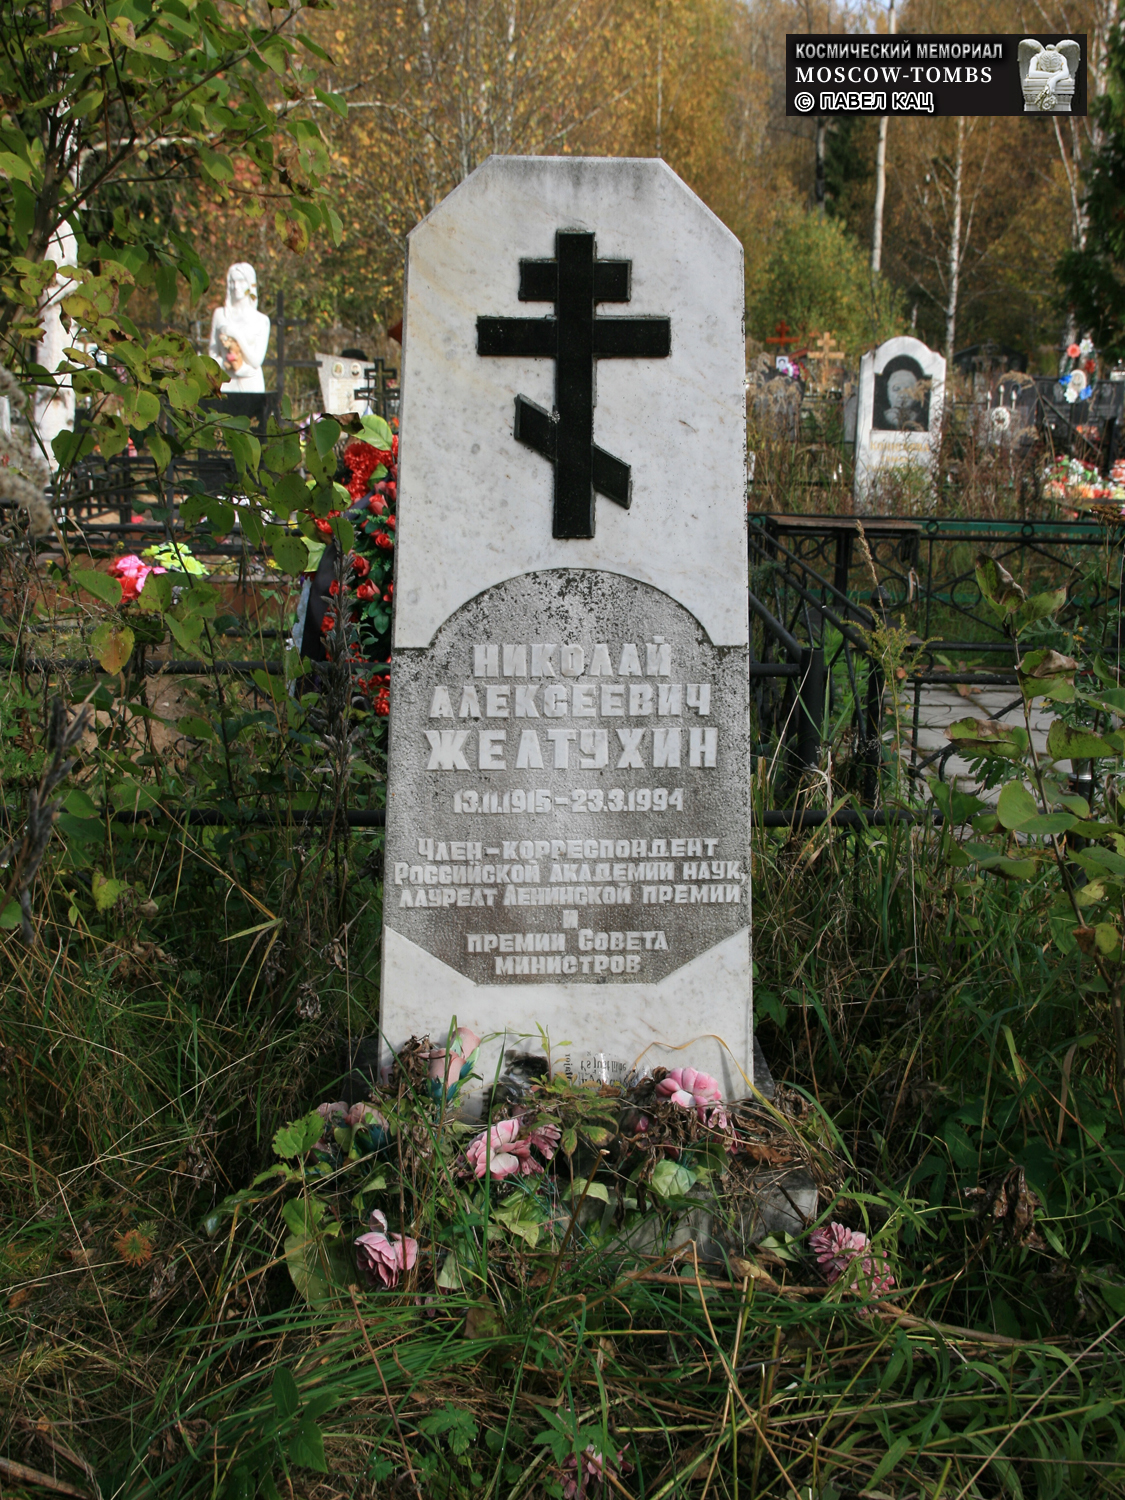  , . ,   (.  12).    ..  (  -  ; 8  2020 ;  "Moscow-tombs")